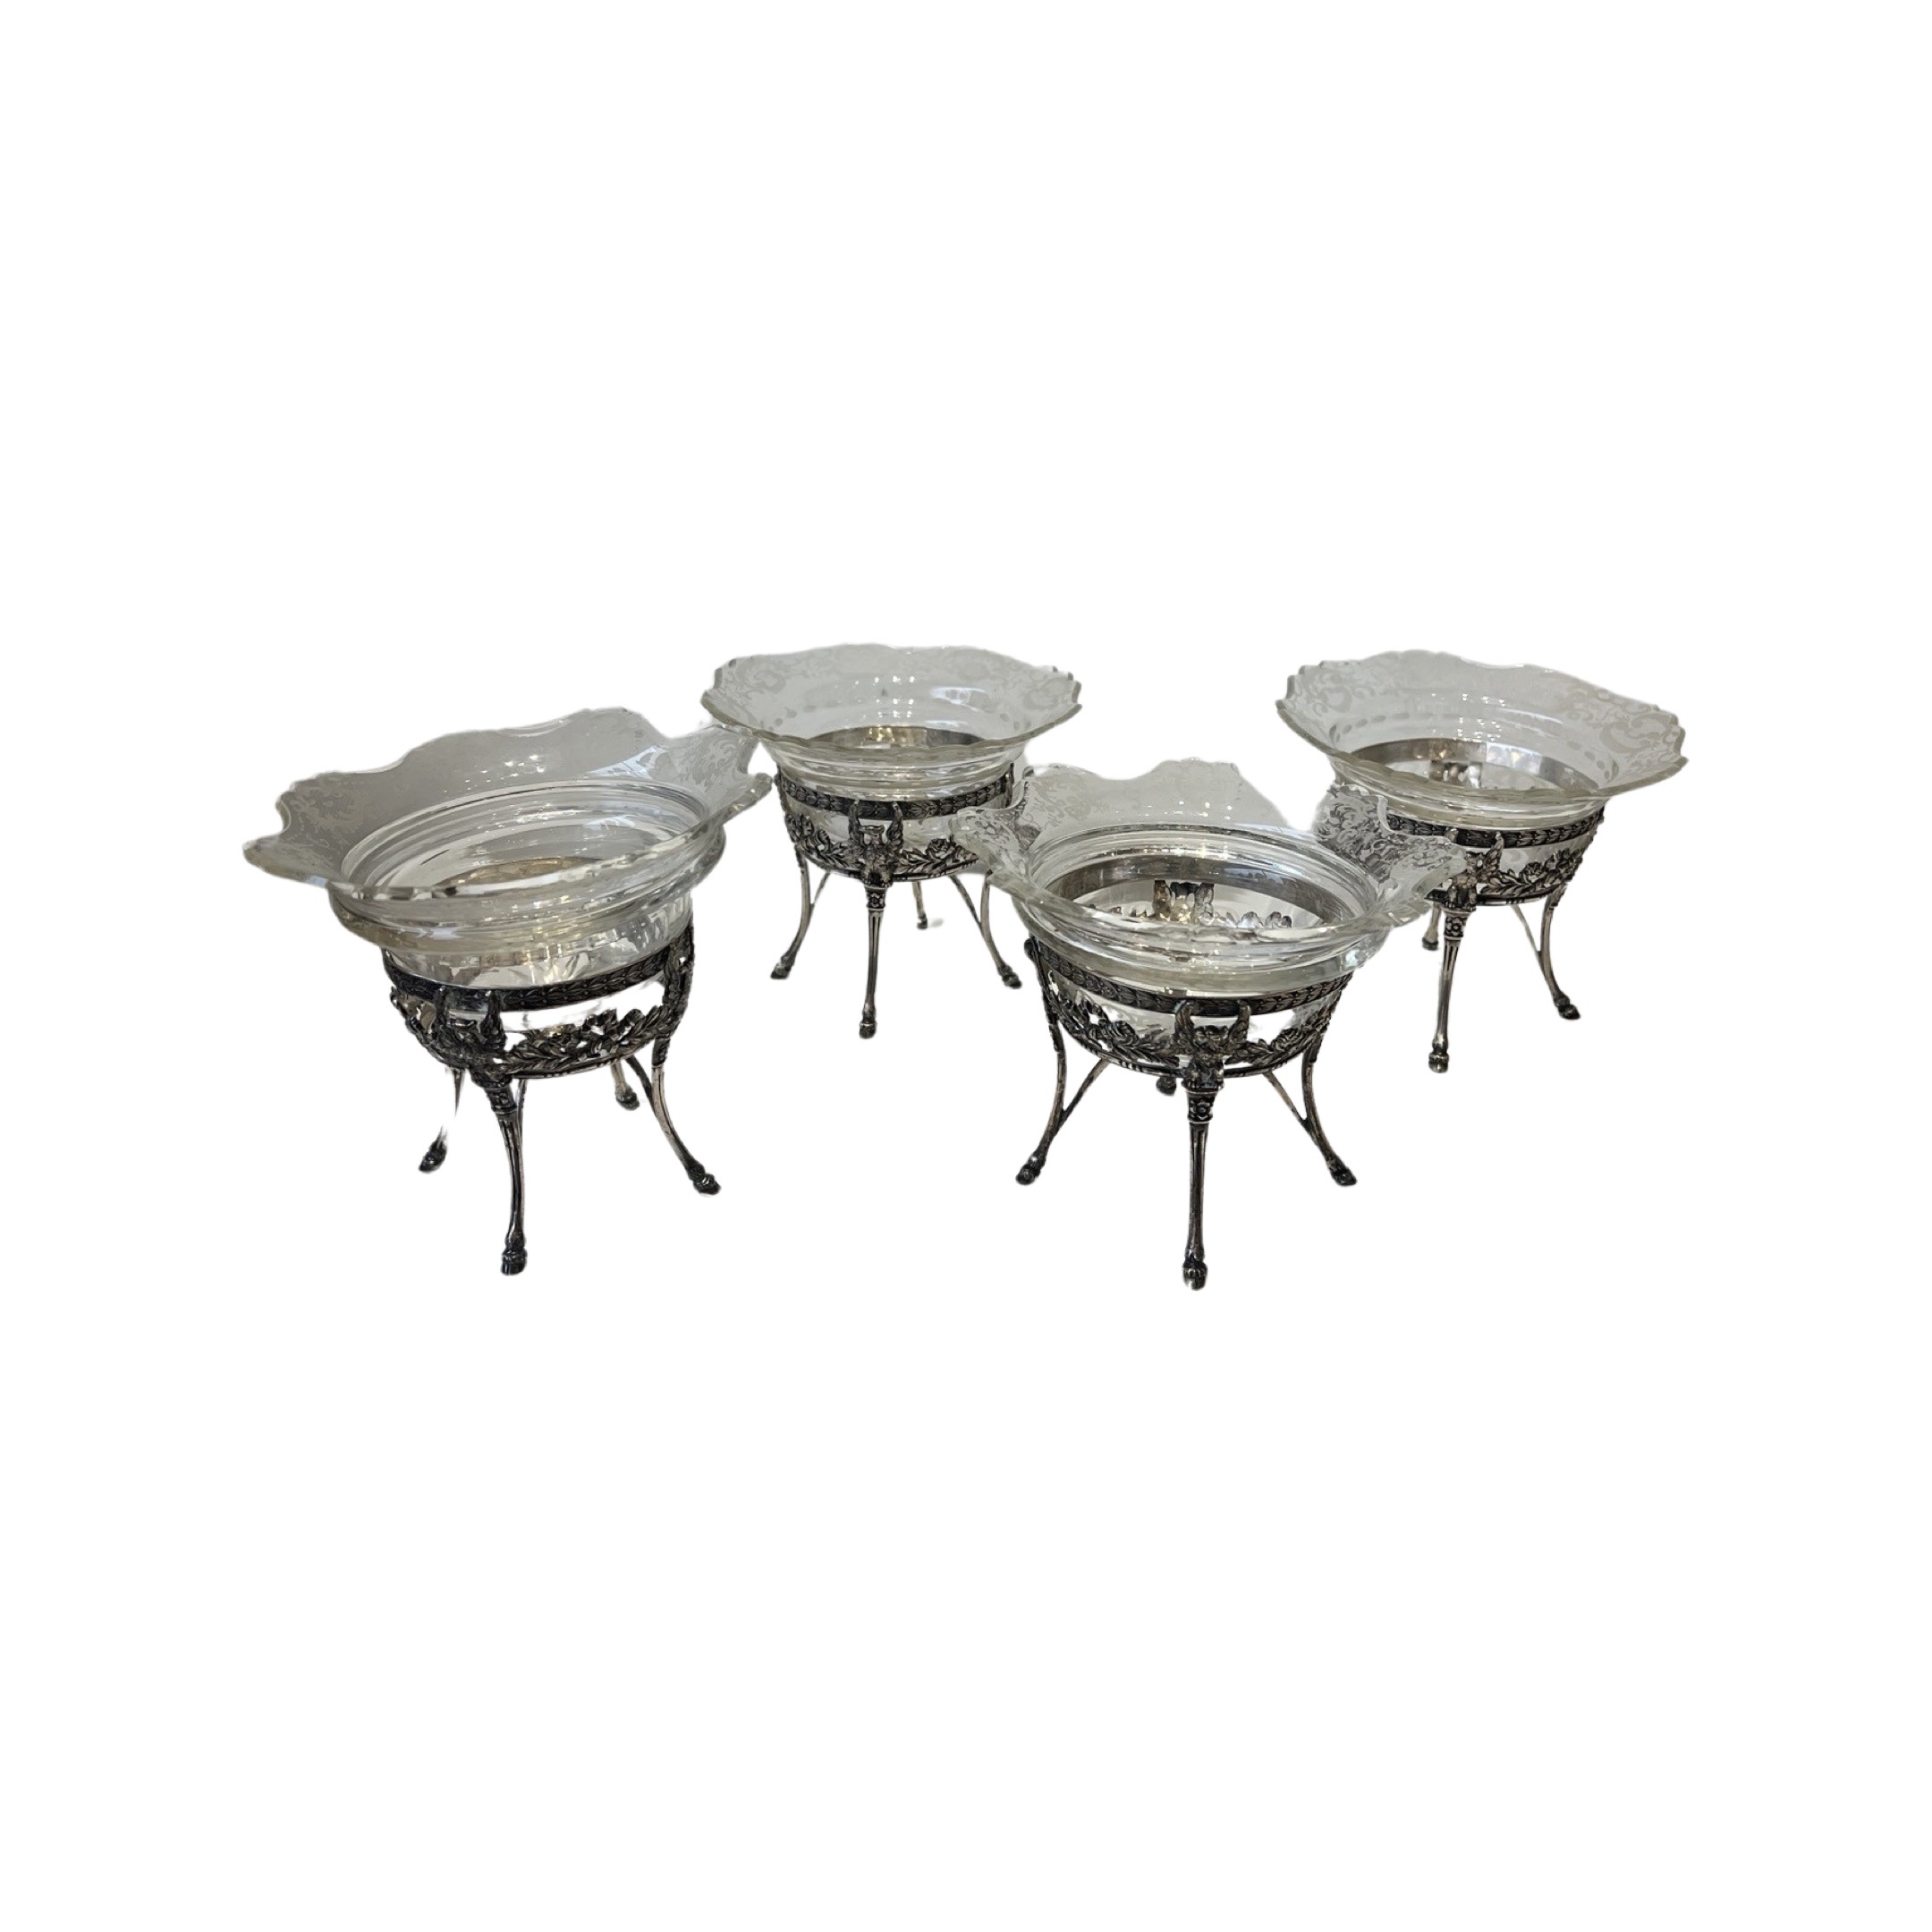 A SET OF FOUR SILVER AND CUT GLASS SWEETMEAT BASKETS, POSSIBLY GERMAN, C. 1860 - Image 2 of 4